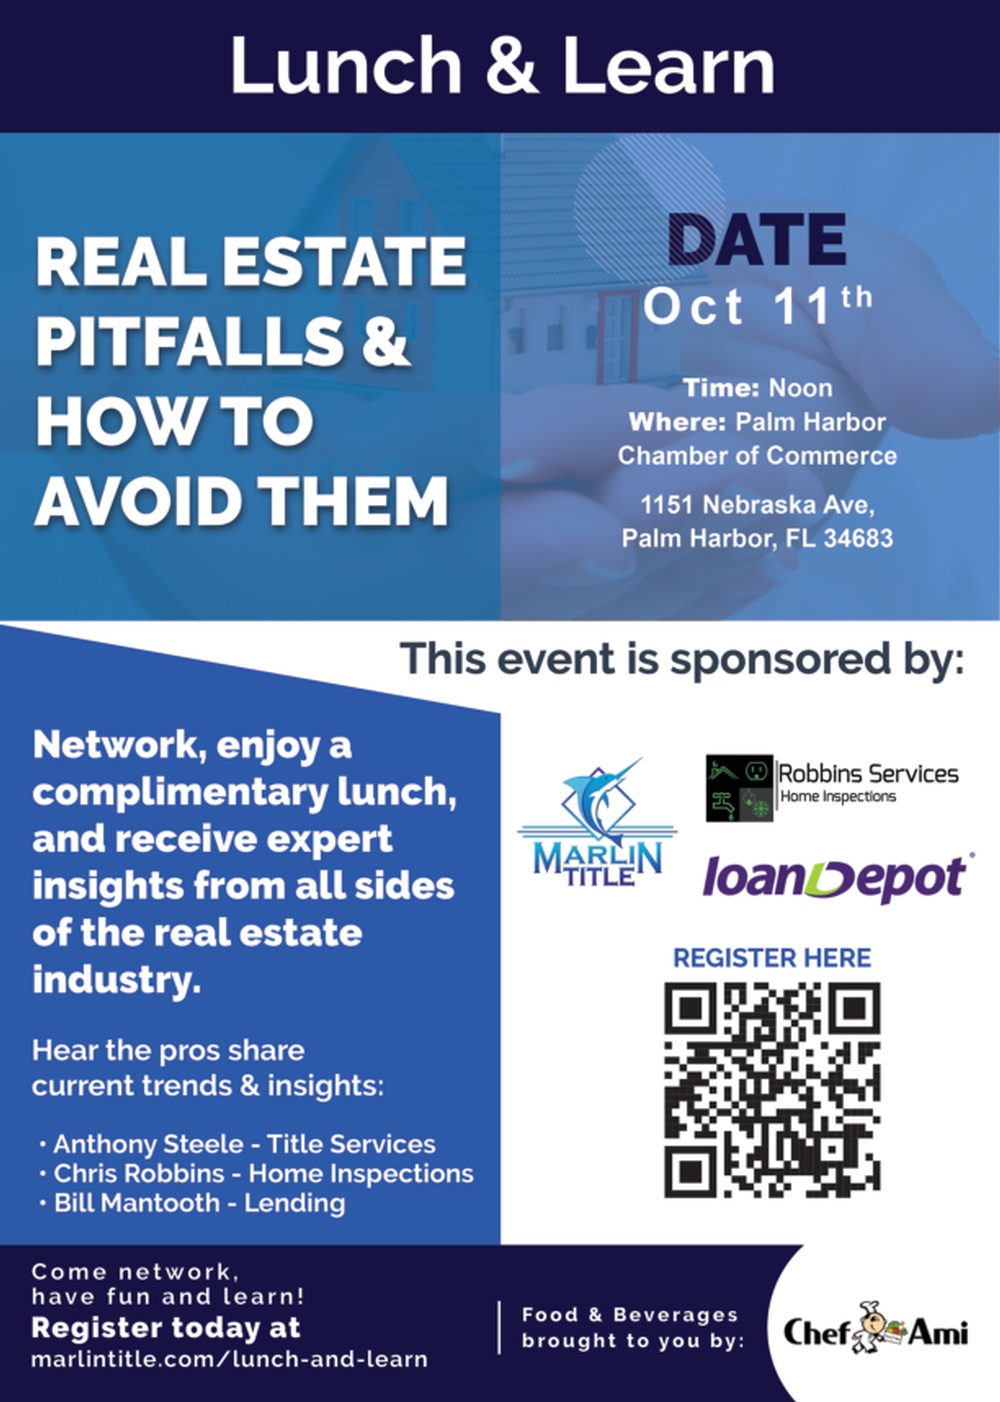 Lunch & Learn - Real Estate Pitfalls & How to Avoid Them